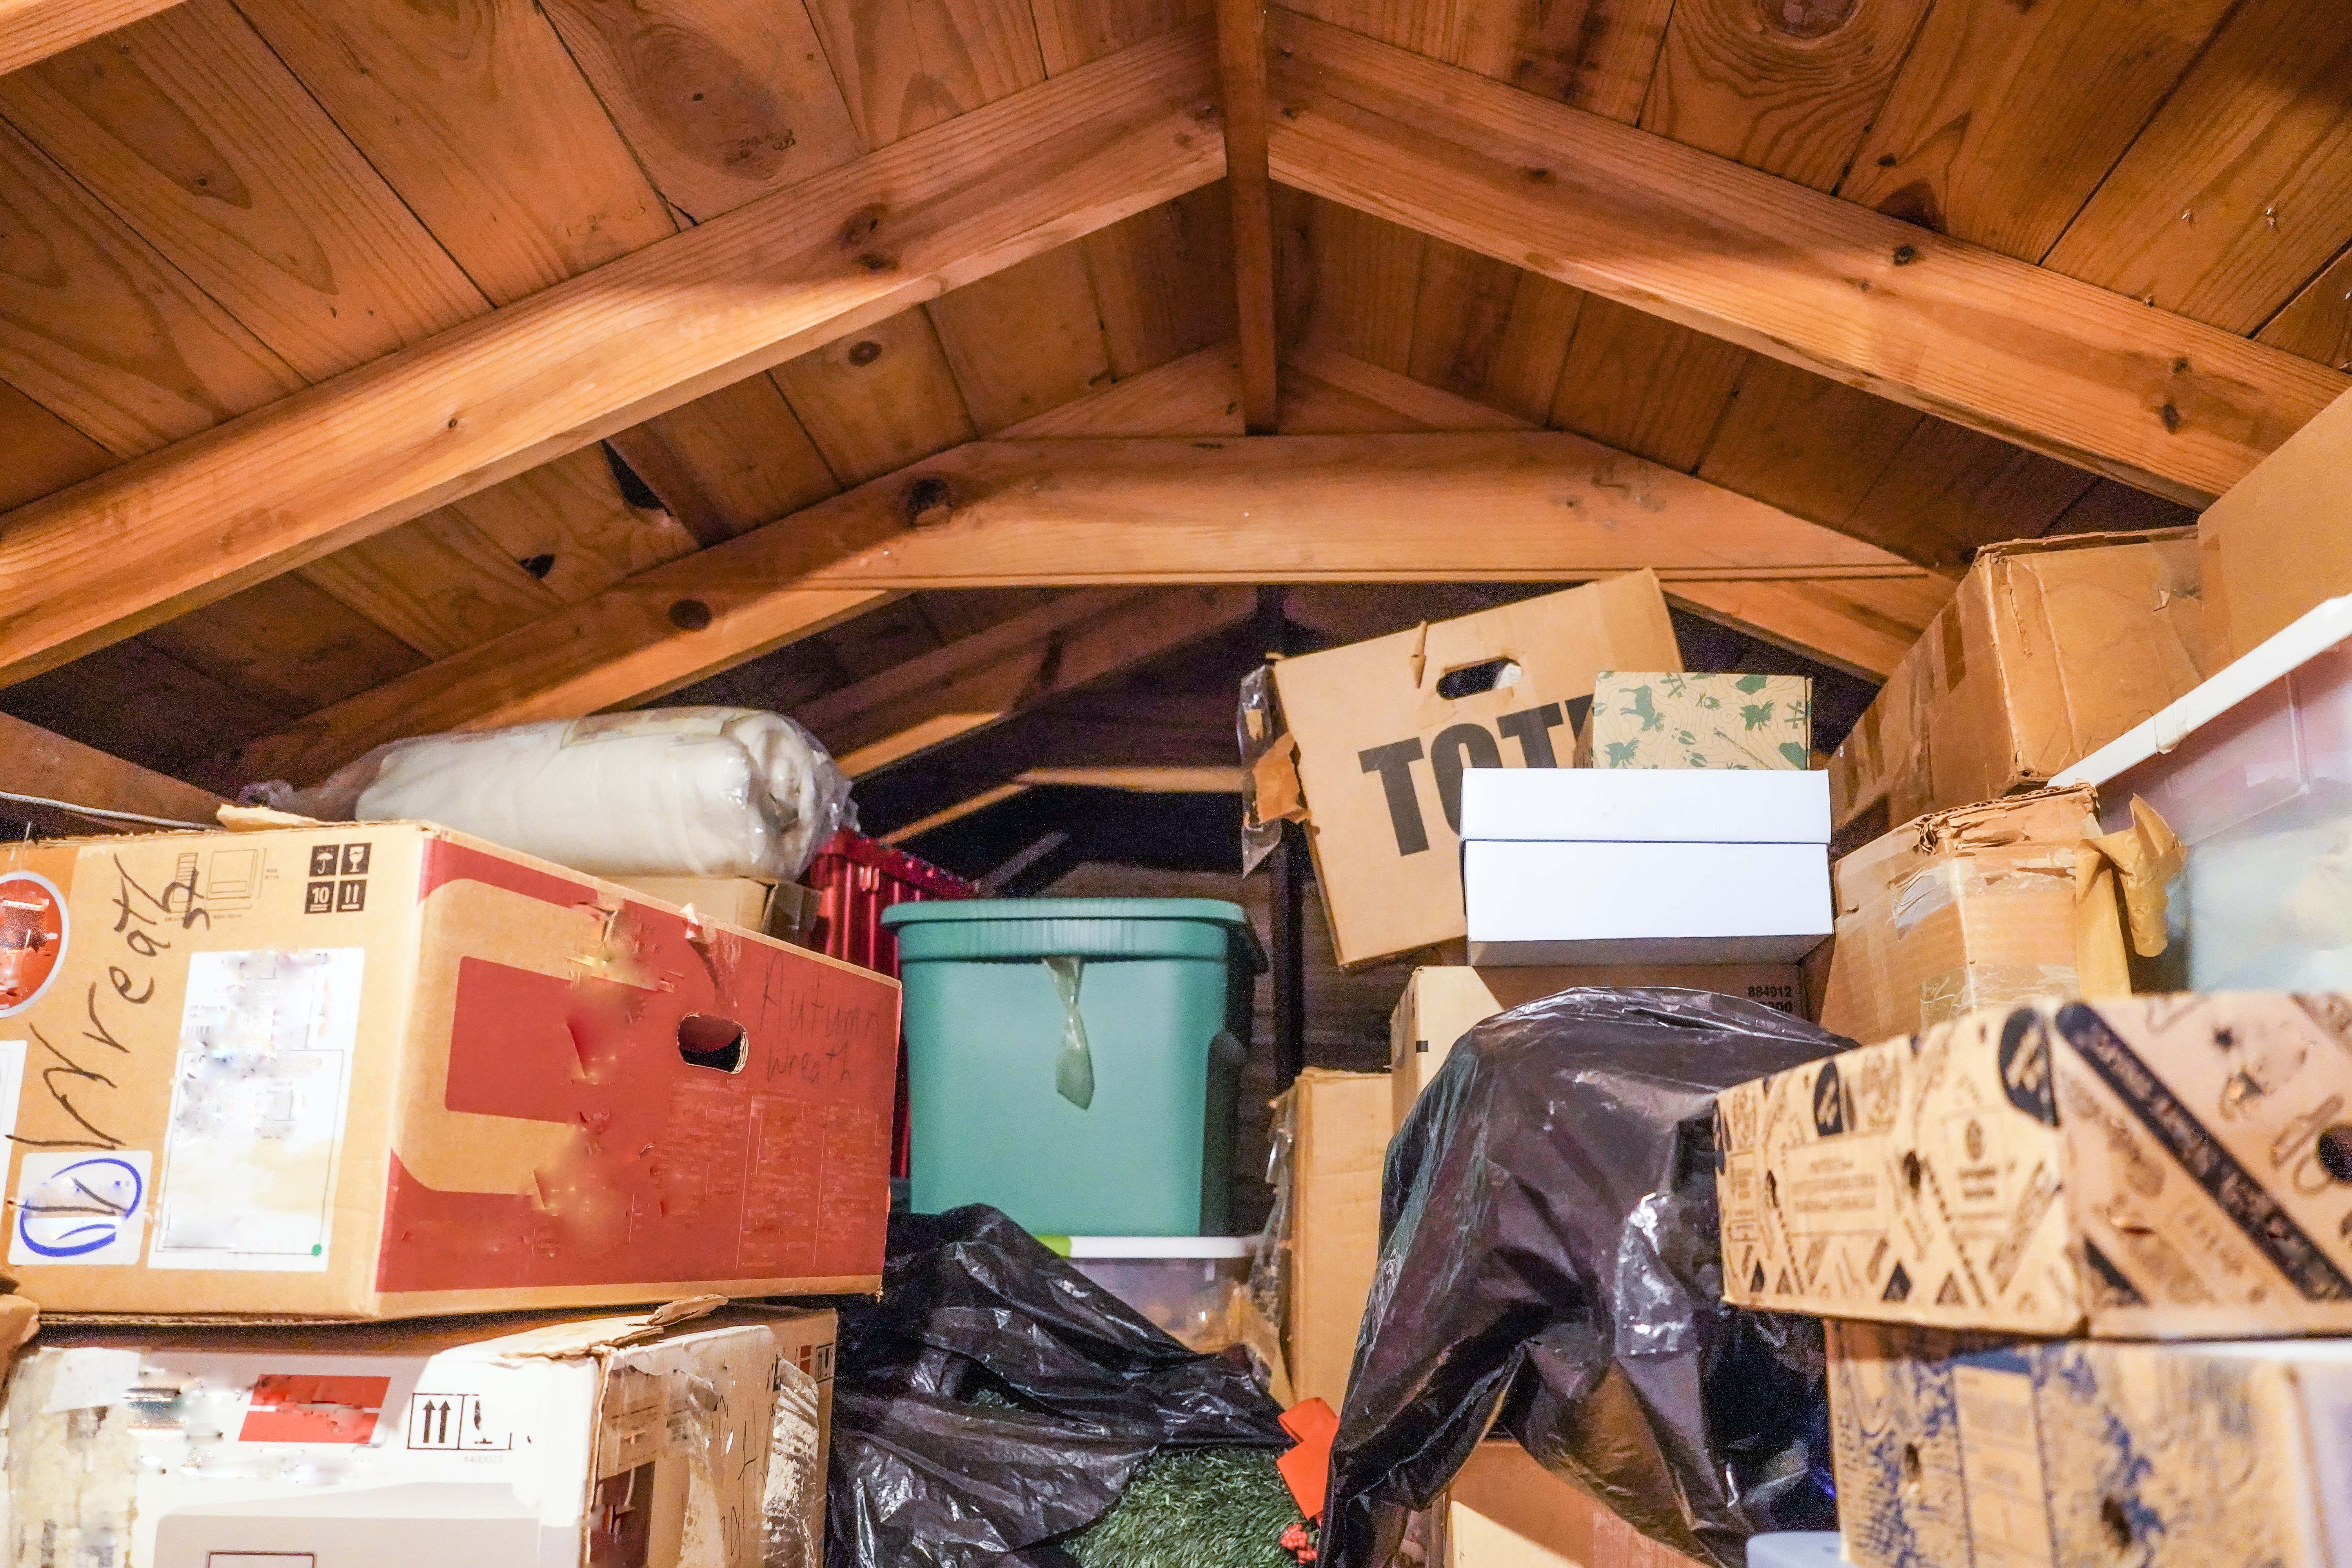 Contrary to what many think, packing the loft with boxes and unused furniture will not help to insulate the home